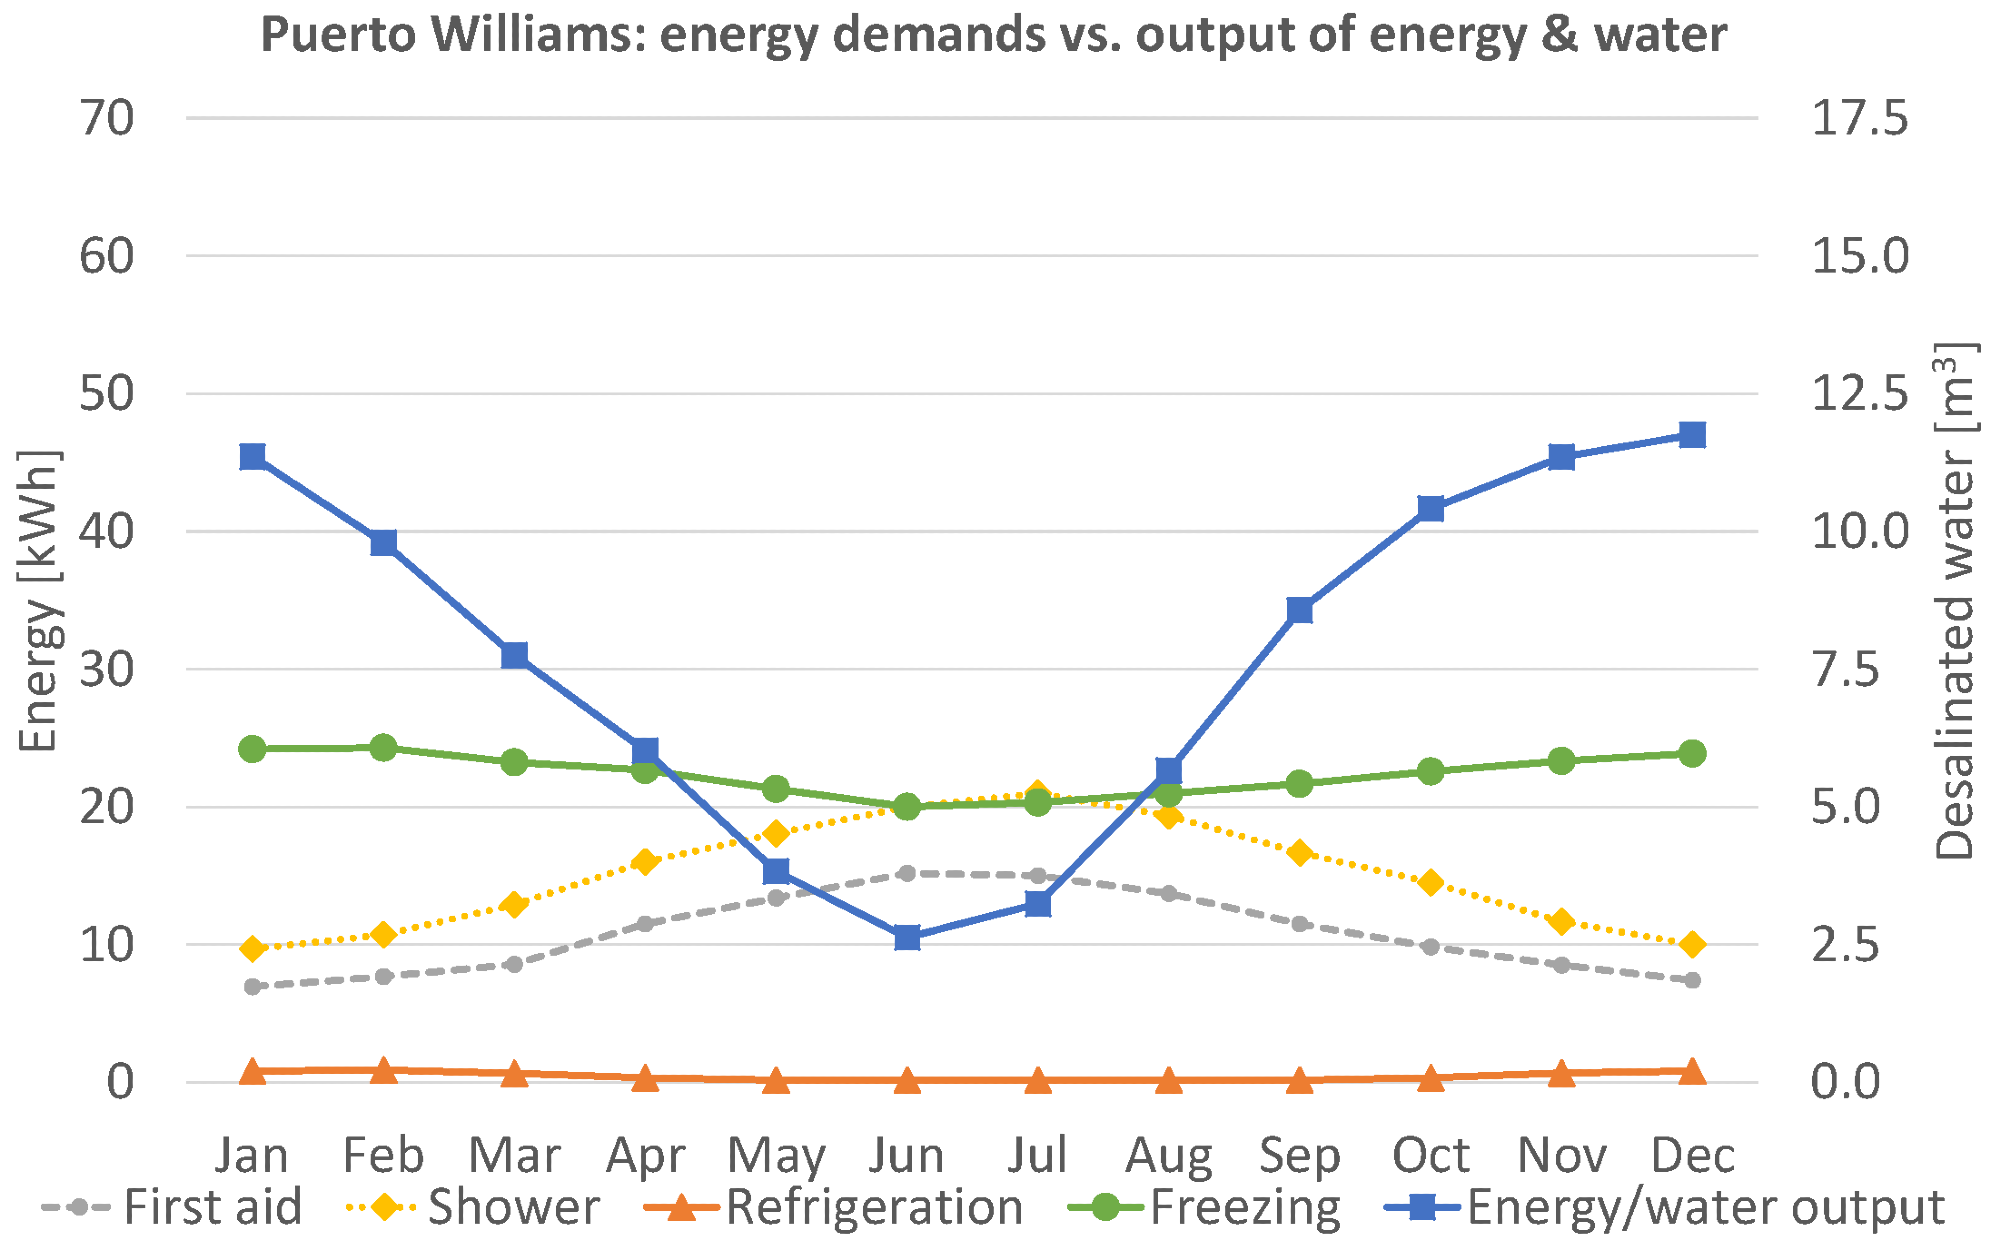 Puerto Williams, Chile. Left axis: Average daily demands of the first-aid, shower, refrigerator and freezing modules and average daily energy output of the supply container. Right axis: Average daily output of drinking water by desalination of sea water assuming a specific energy of 4 kWh m-3.